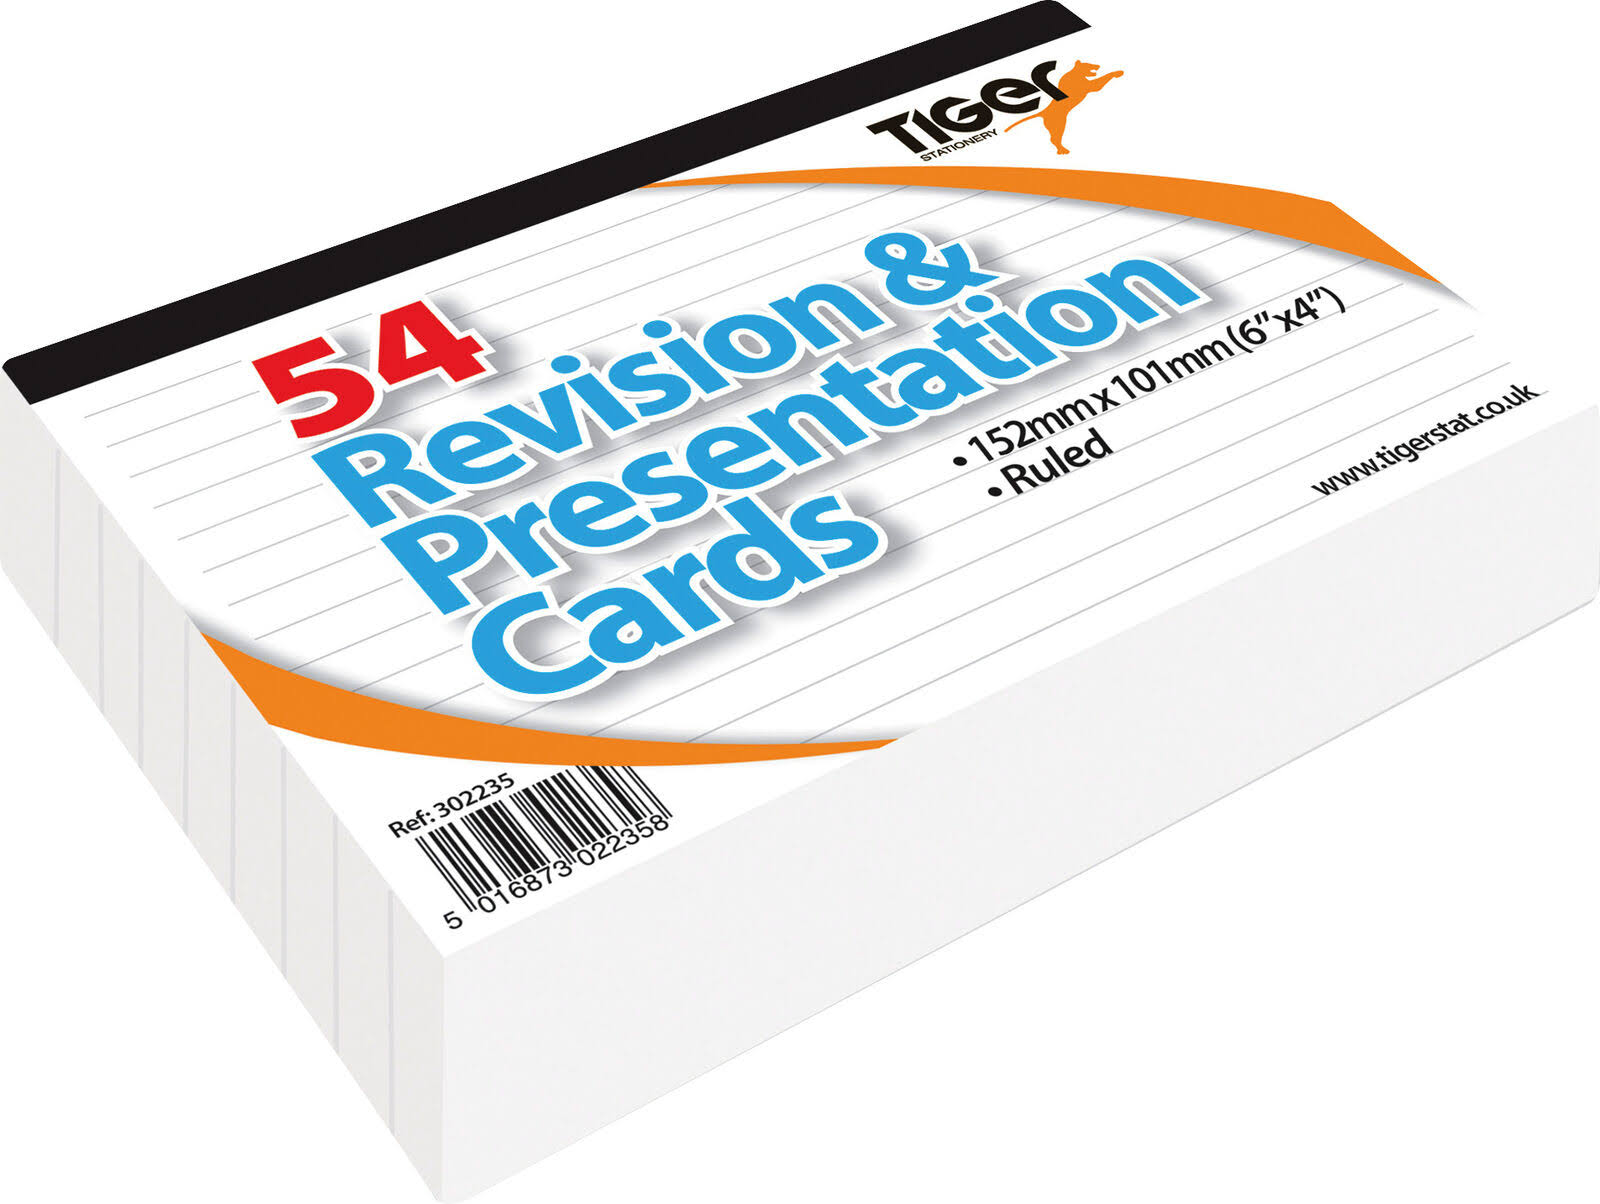 Revision and Presentation Cards 54 White (Pack of 10) 302235